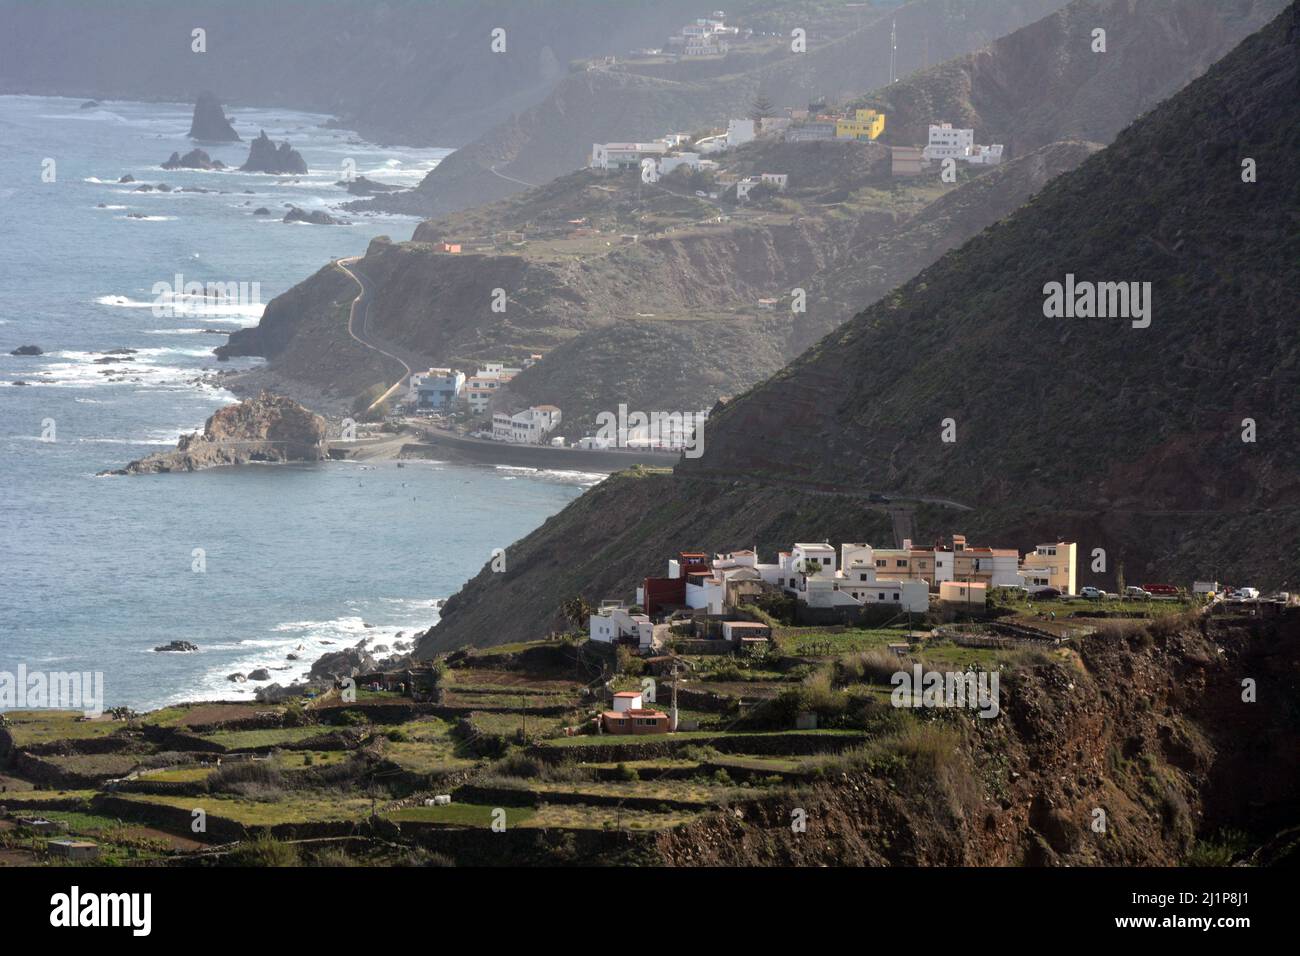 Part of the Spanish village of Taganana in the Anaga Mountains on the north coast of the island of Tenerife, Anaga Rural Park, Canary Islands, Spain. Stock Photo